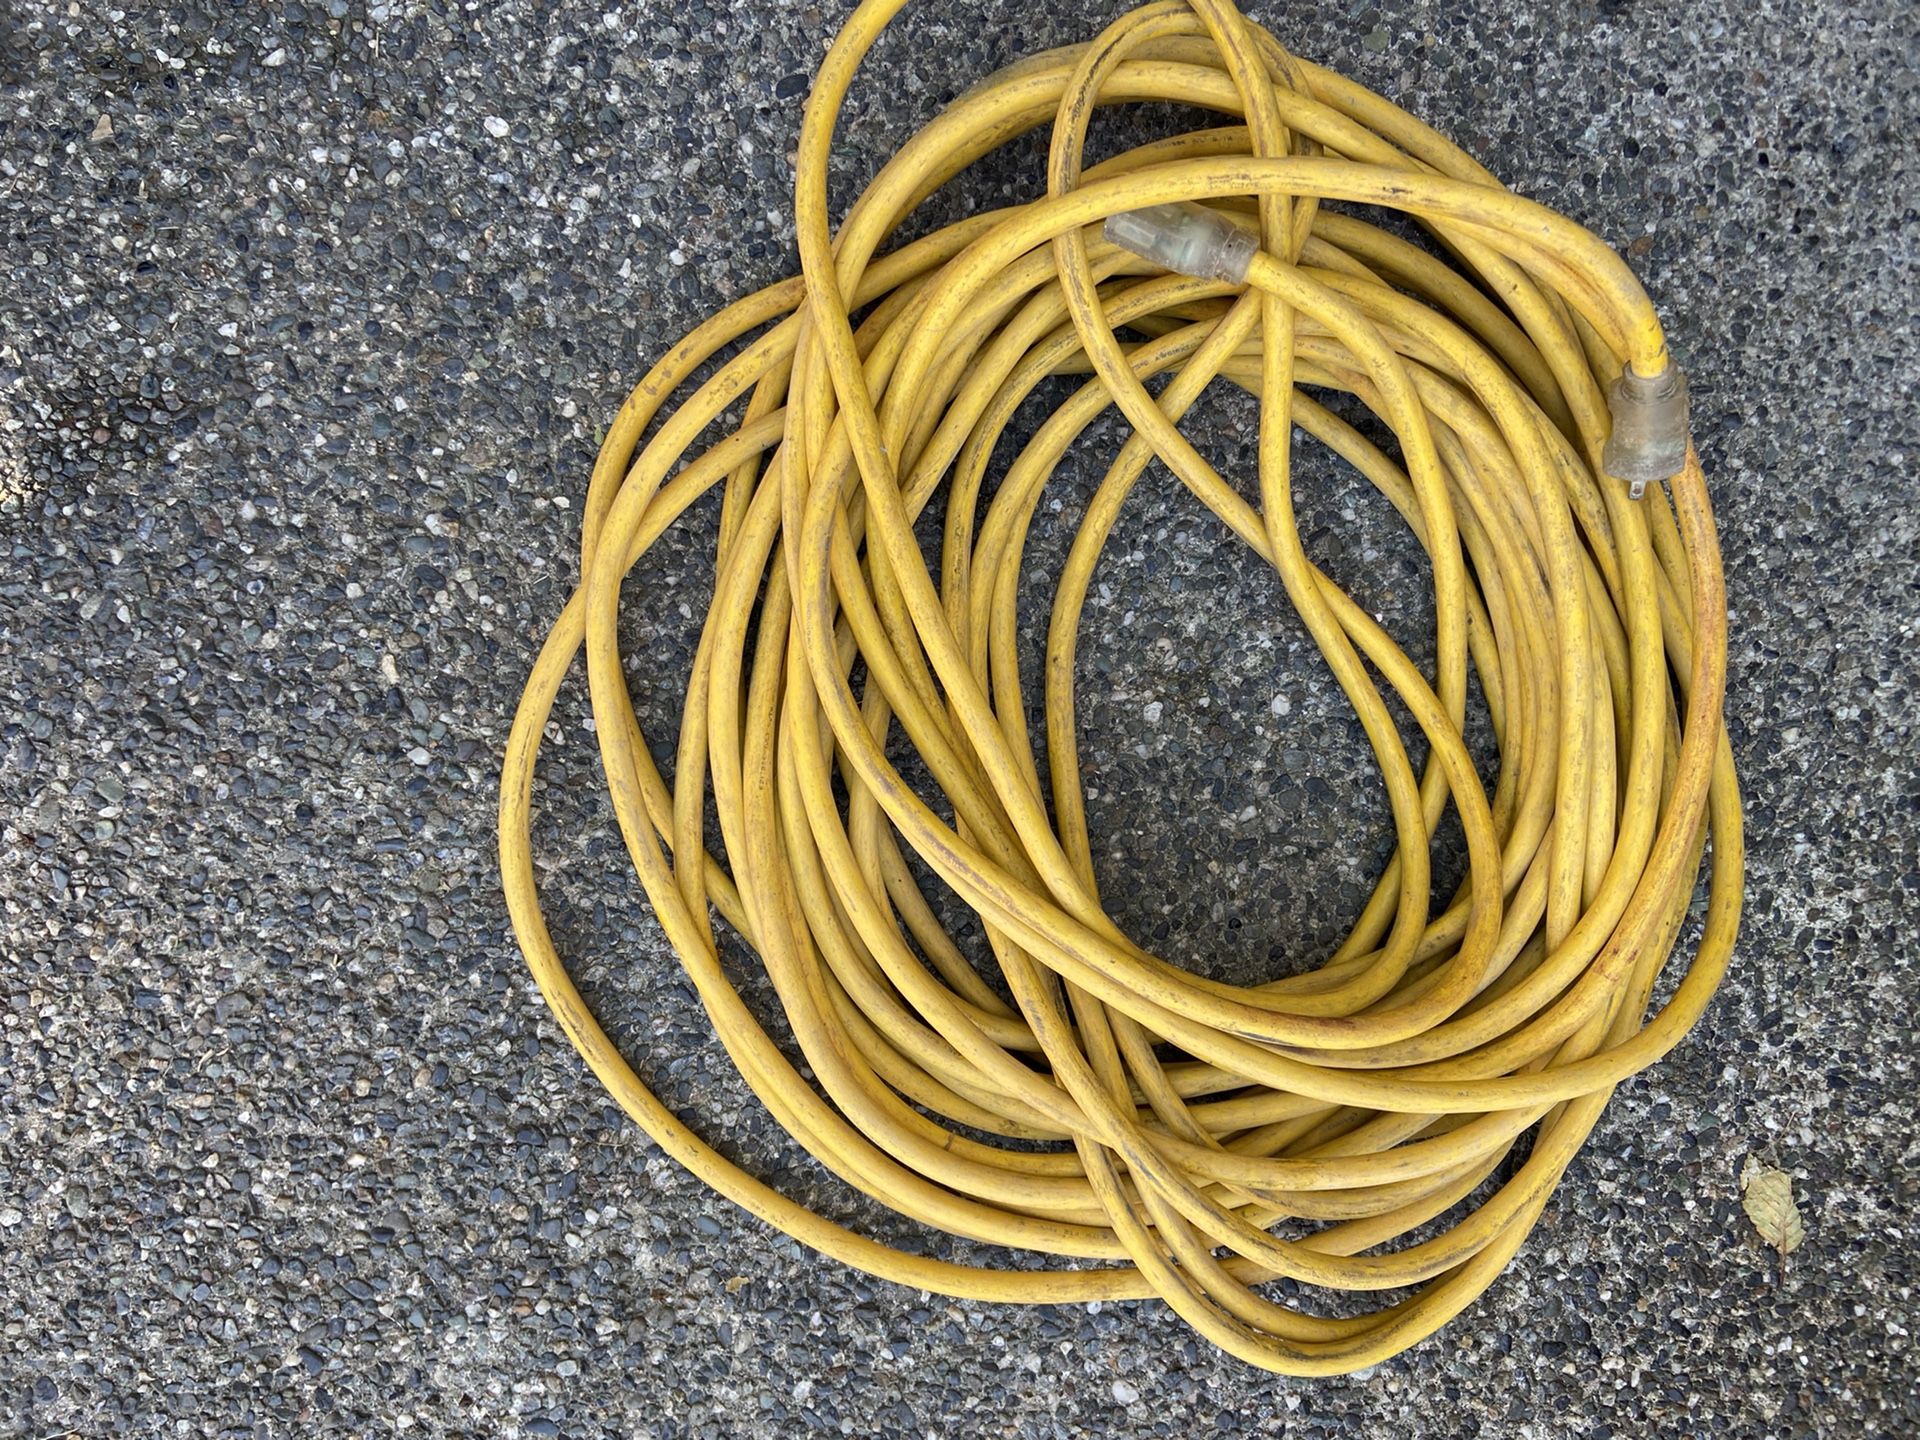 80ft Yellow Contractors Extension Cord With Light Up Ends E217996 